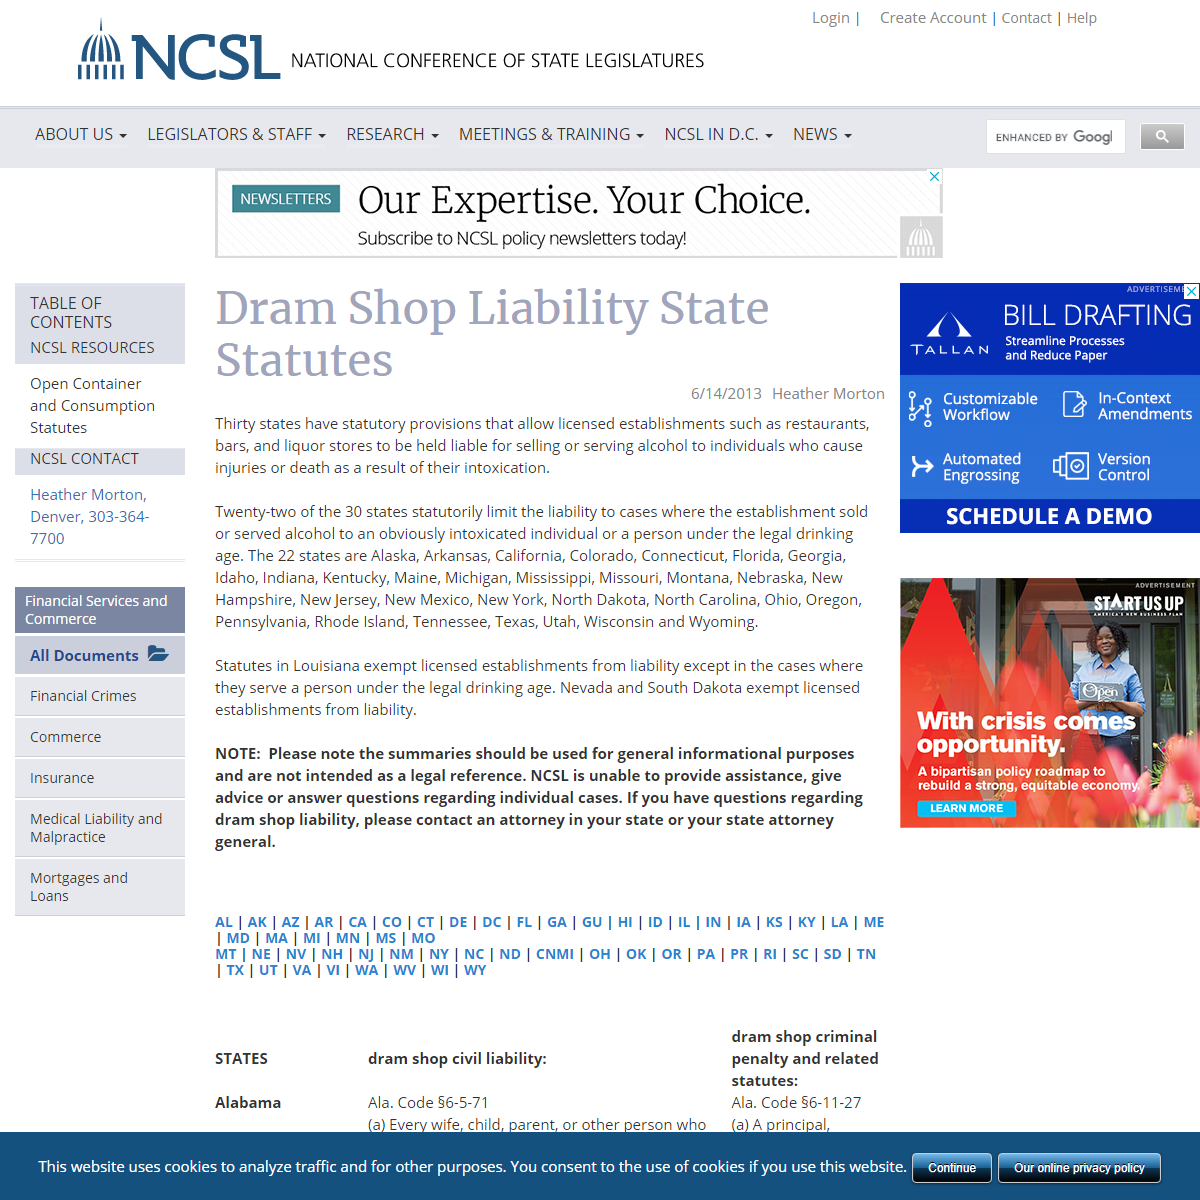 A complete backup of https://www.ncsl.org/research/financial-services-and-commerce/dram-shop-liability-state-statutes.aspx